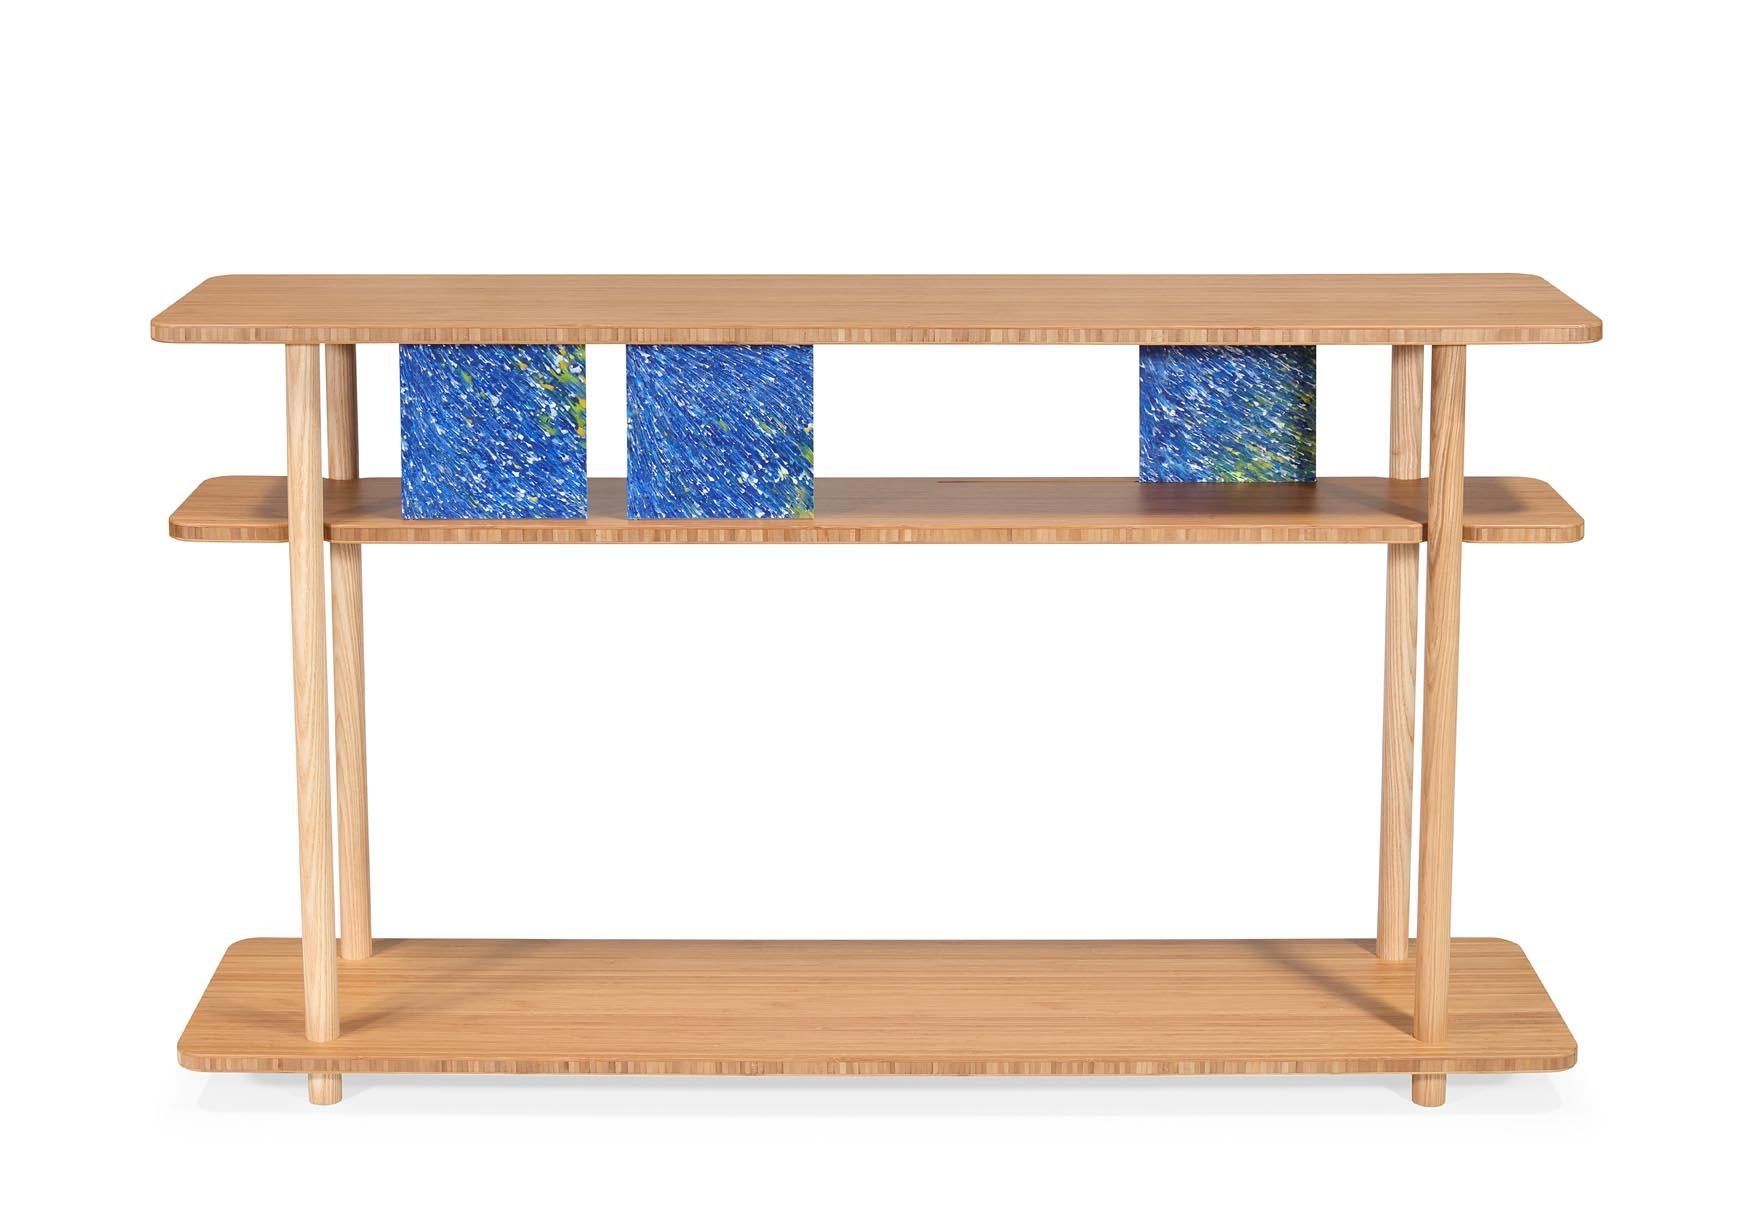 From the interactive use of recycled plastic plates to the exquisite bamboo boards, our new The Palite Console is a true embodiment of eco-conscious design.

The Palito Console is more than just a piece of furniture. It is a new attitude of reducing